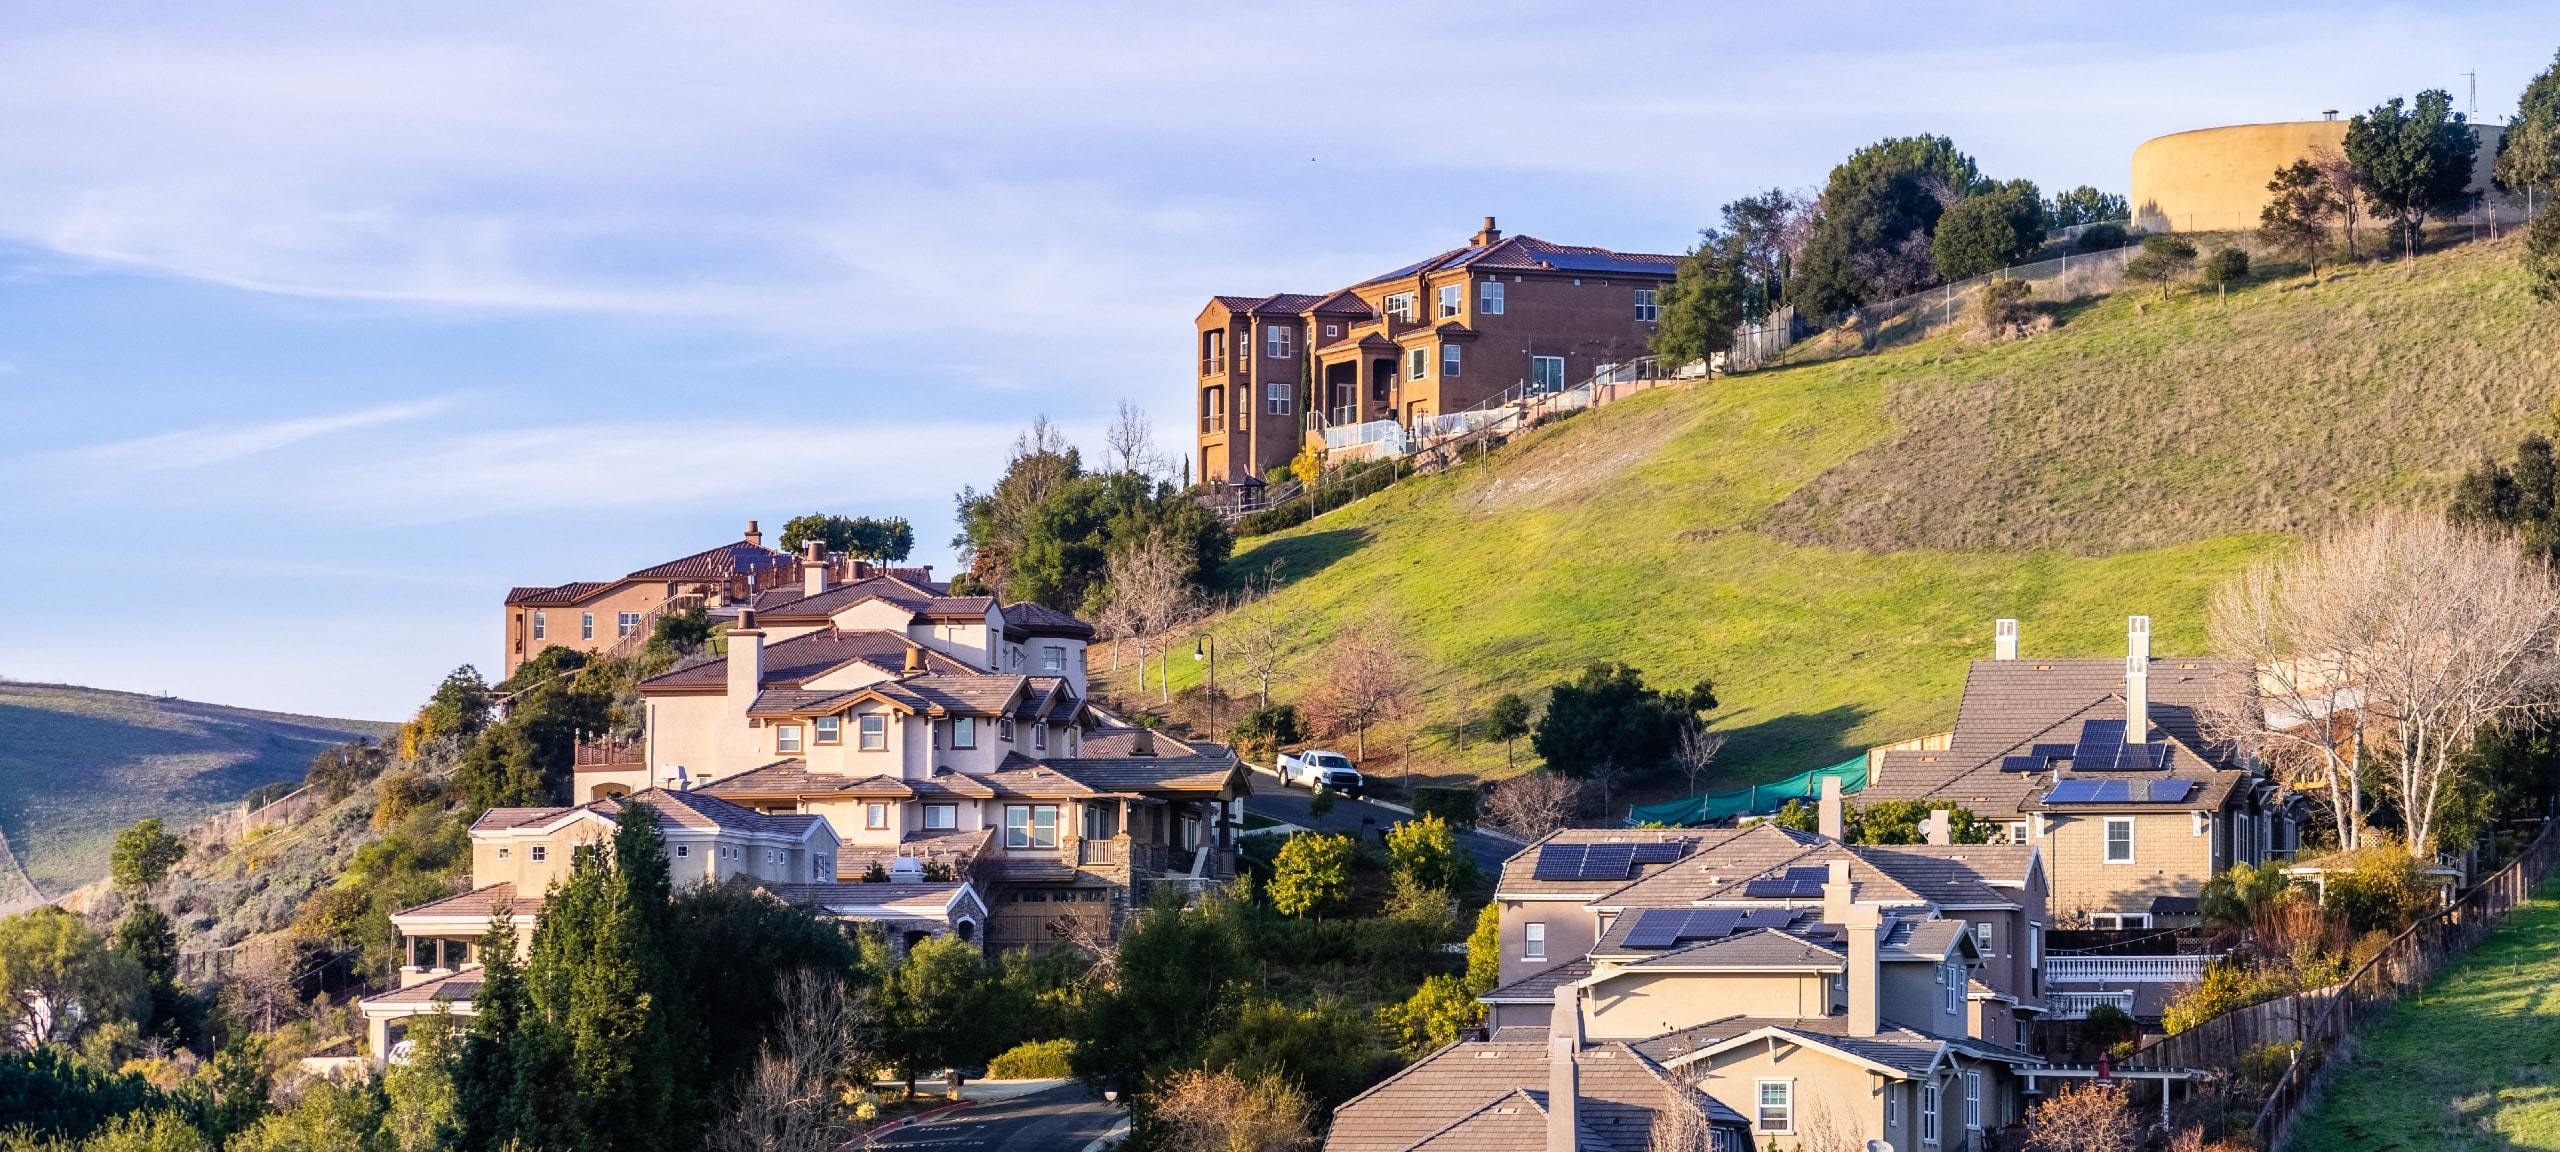 Real estate on a hill in residential area of Hayward, California